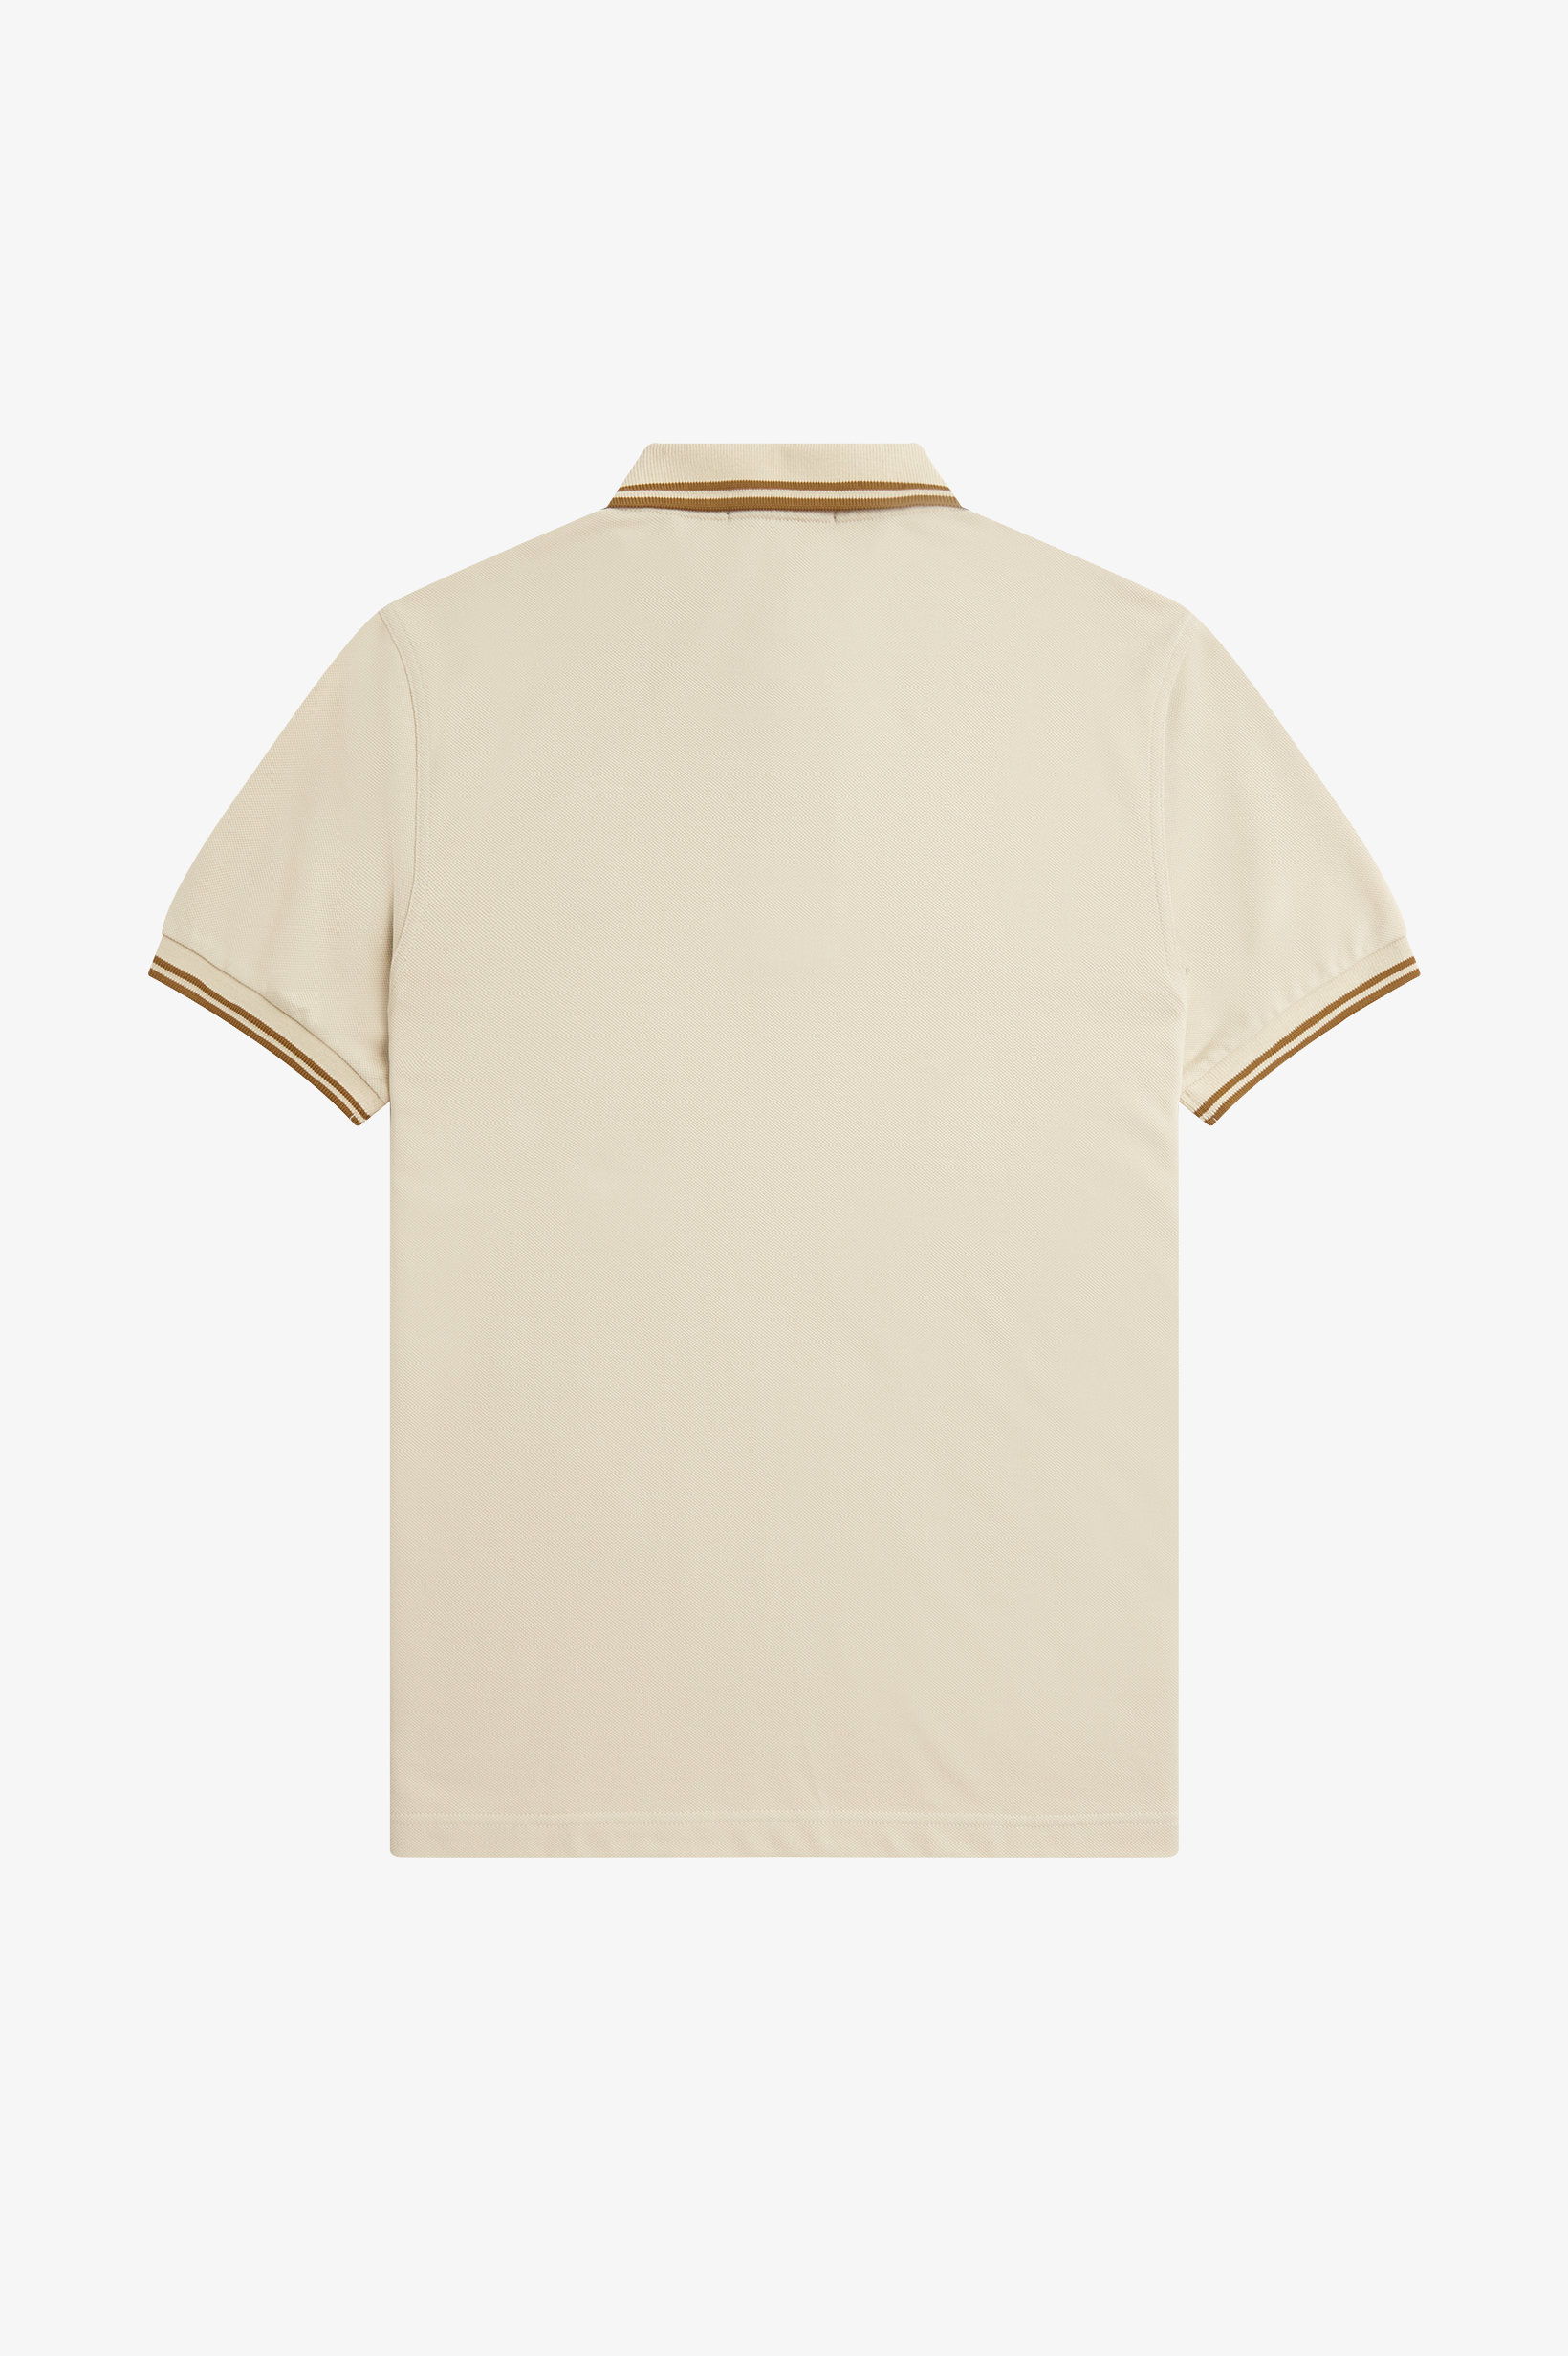 Fred Perry - TWIN TIPPED POLO SHIRT - Oatmeal/Dark Caramel